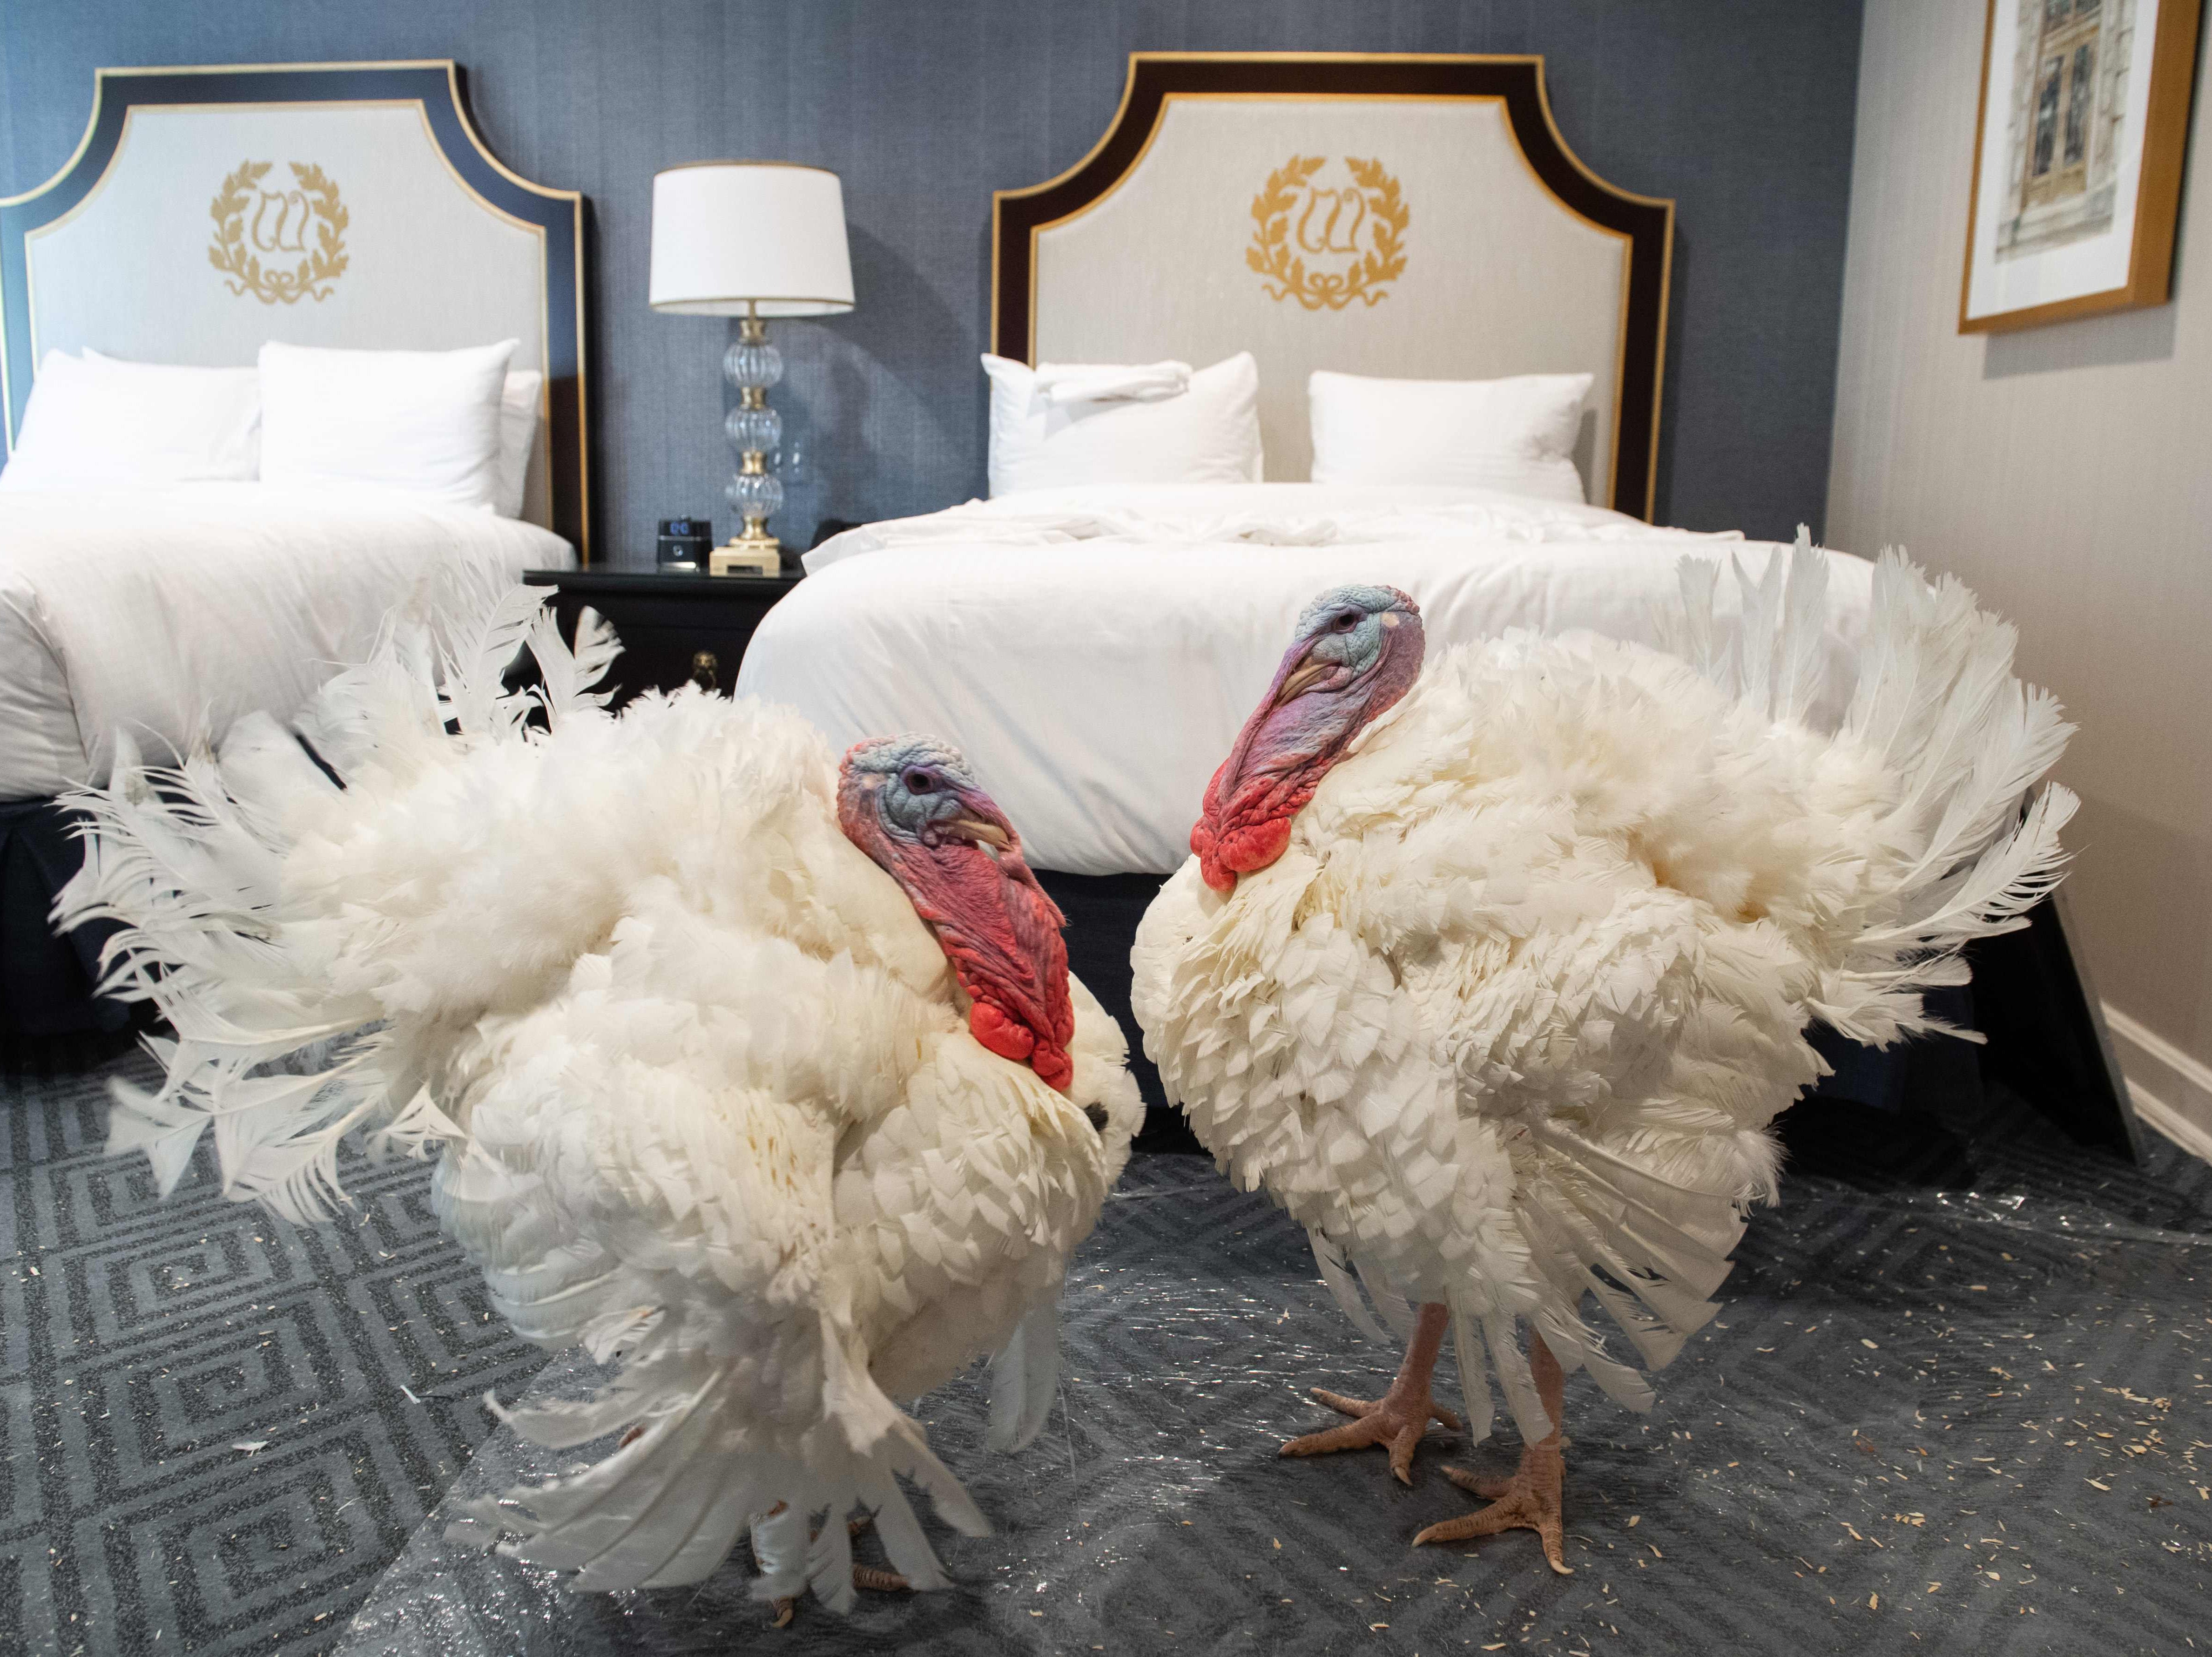 Corn and Cob, a pair of turkeys that will be pardoned by US President Donald Trump, walk inside their hotel room at the Willard Intercontinental Hotel in Washington